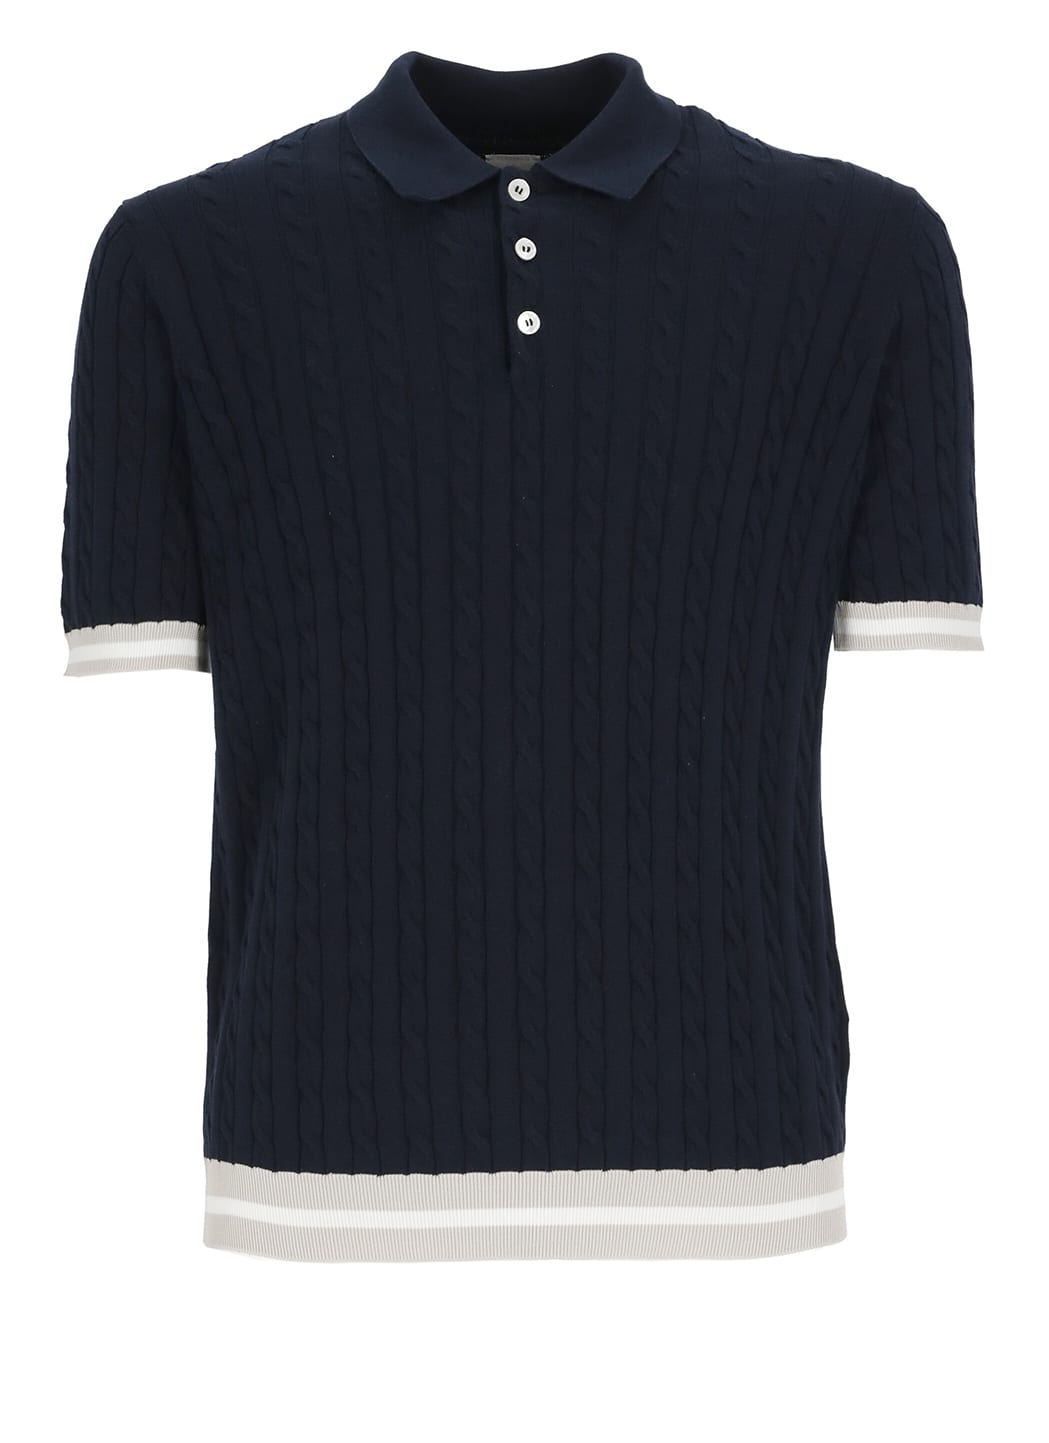 Eleventy Cotton Polo Shirt With Zip